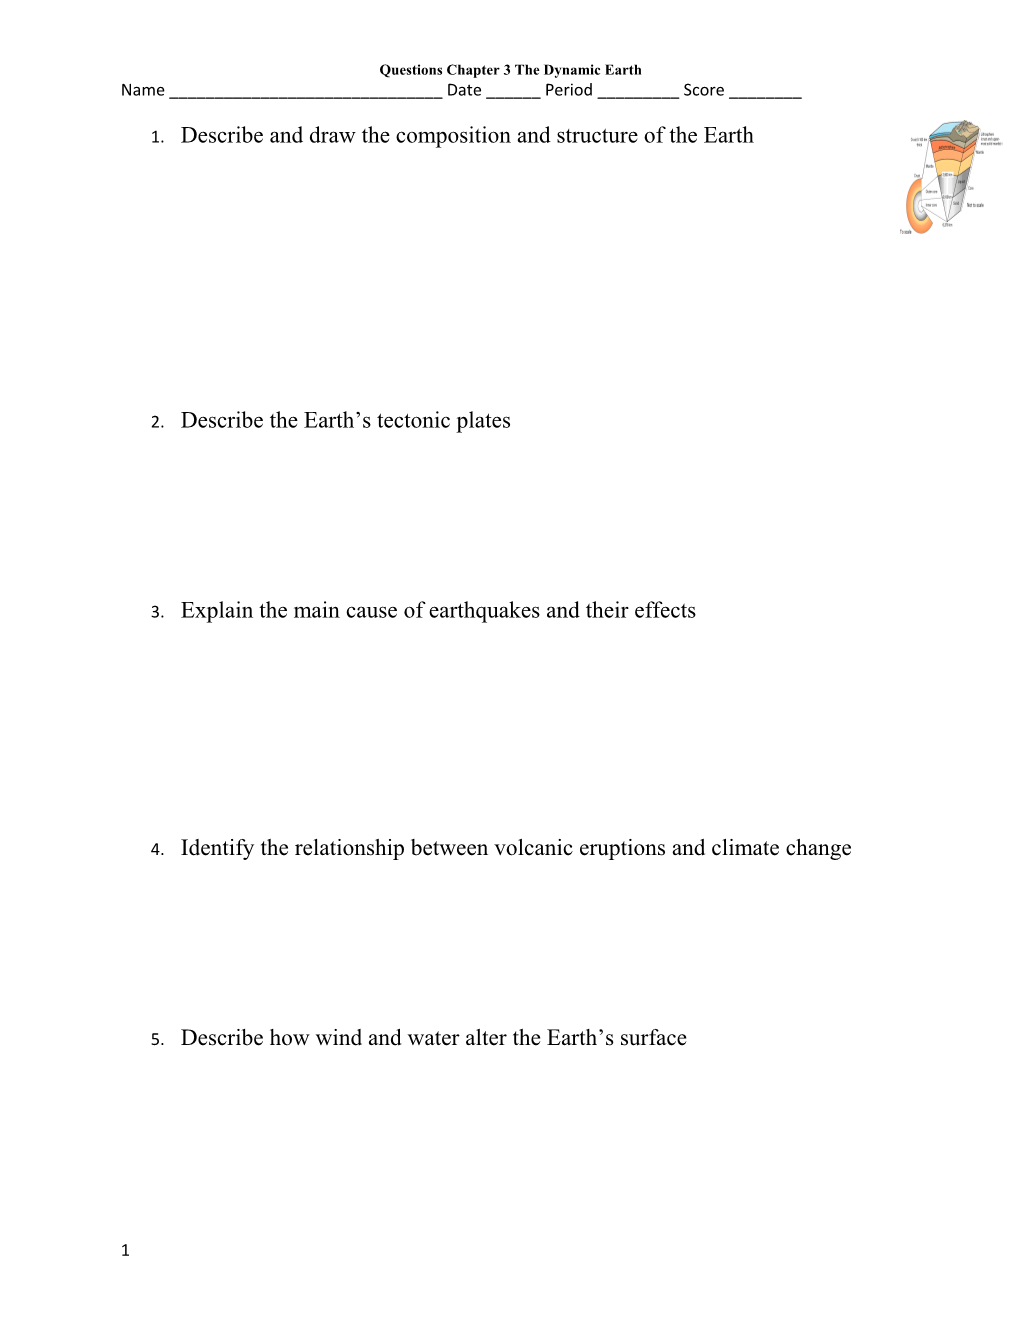 Questions Chapter 3 the Dynamic Earth